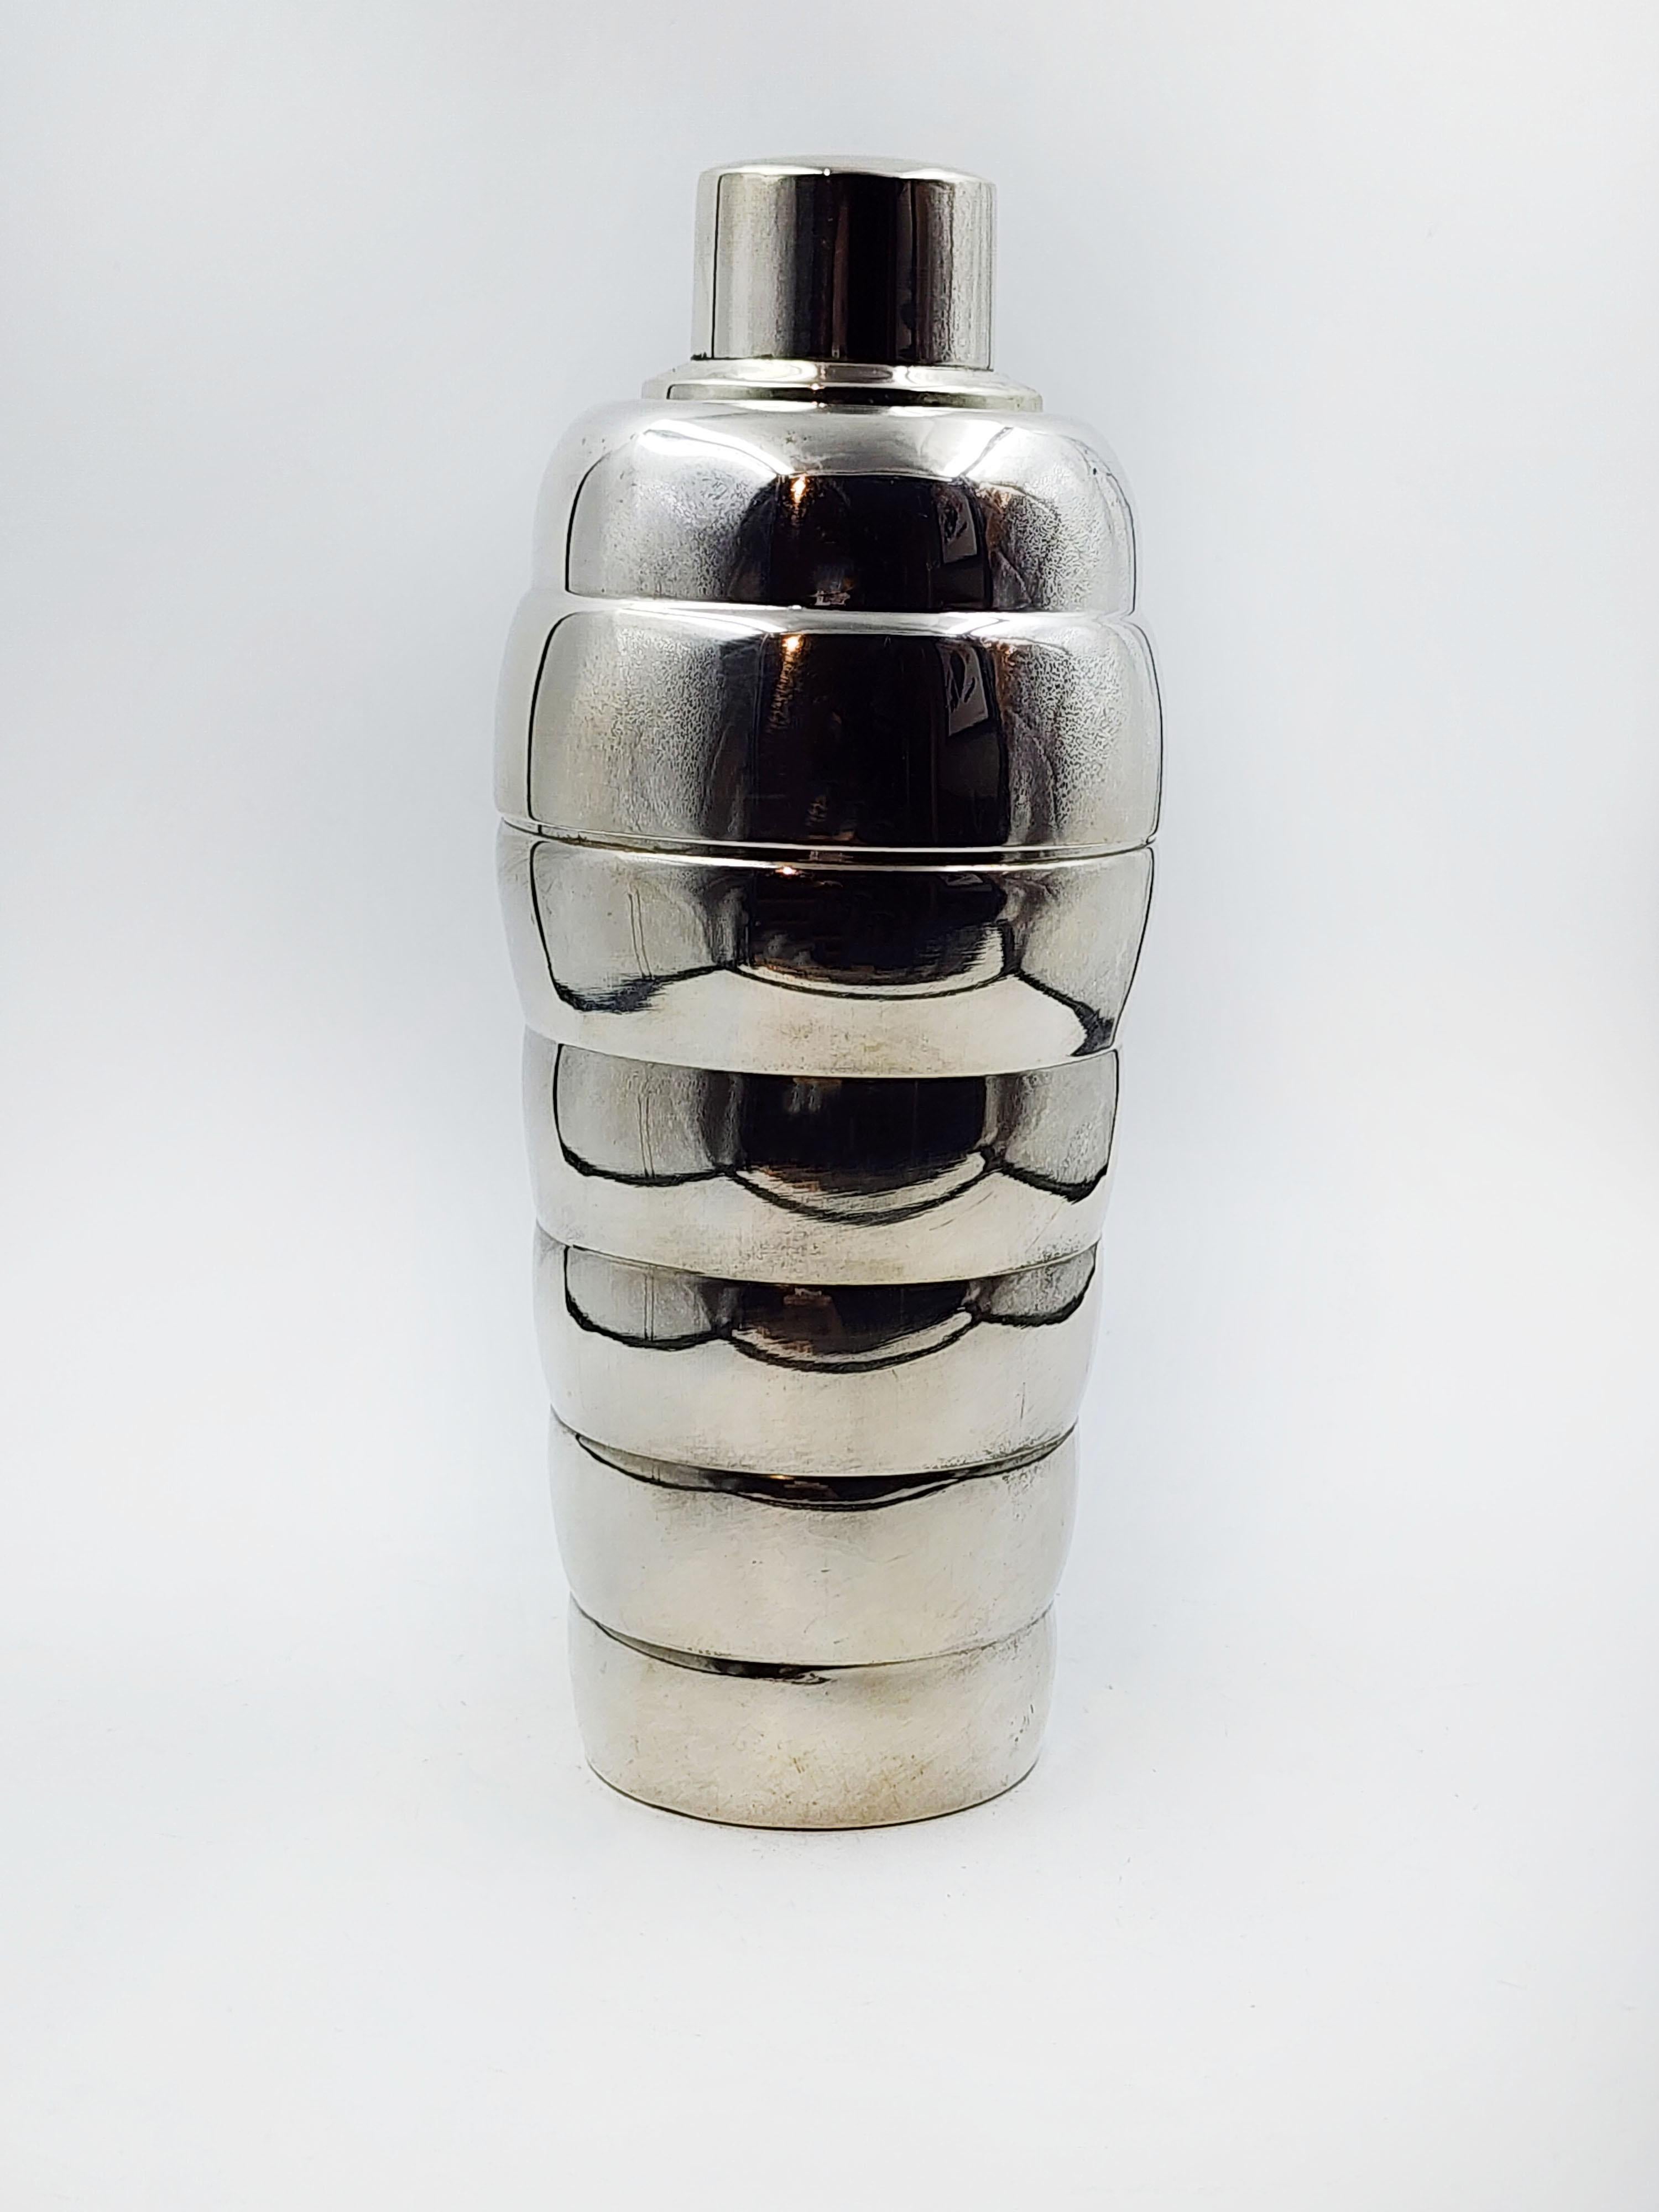 Art Deco silver metal shaker, Cartier 20th century
Elegant art deco cocktail shaker, made of silver metal with a segmented design that looks like inflated stacked rings. The polished finish of the metal reflects the light, although it has slight